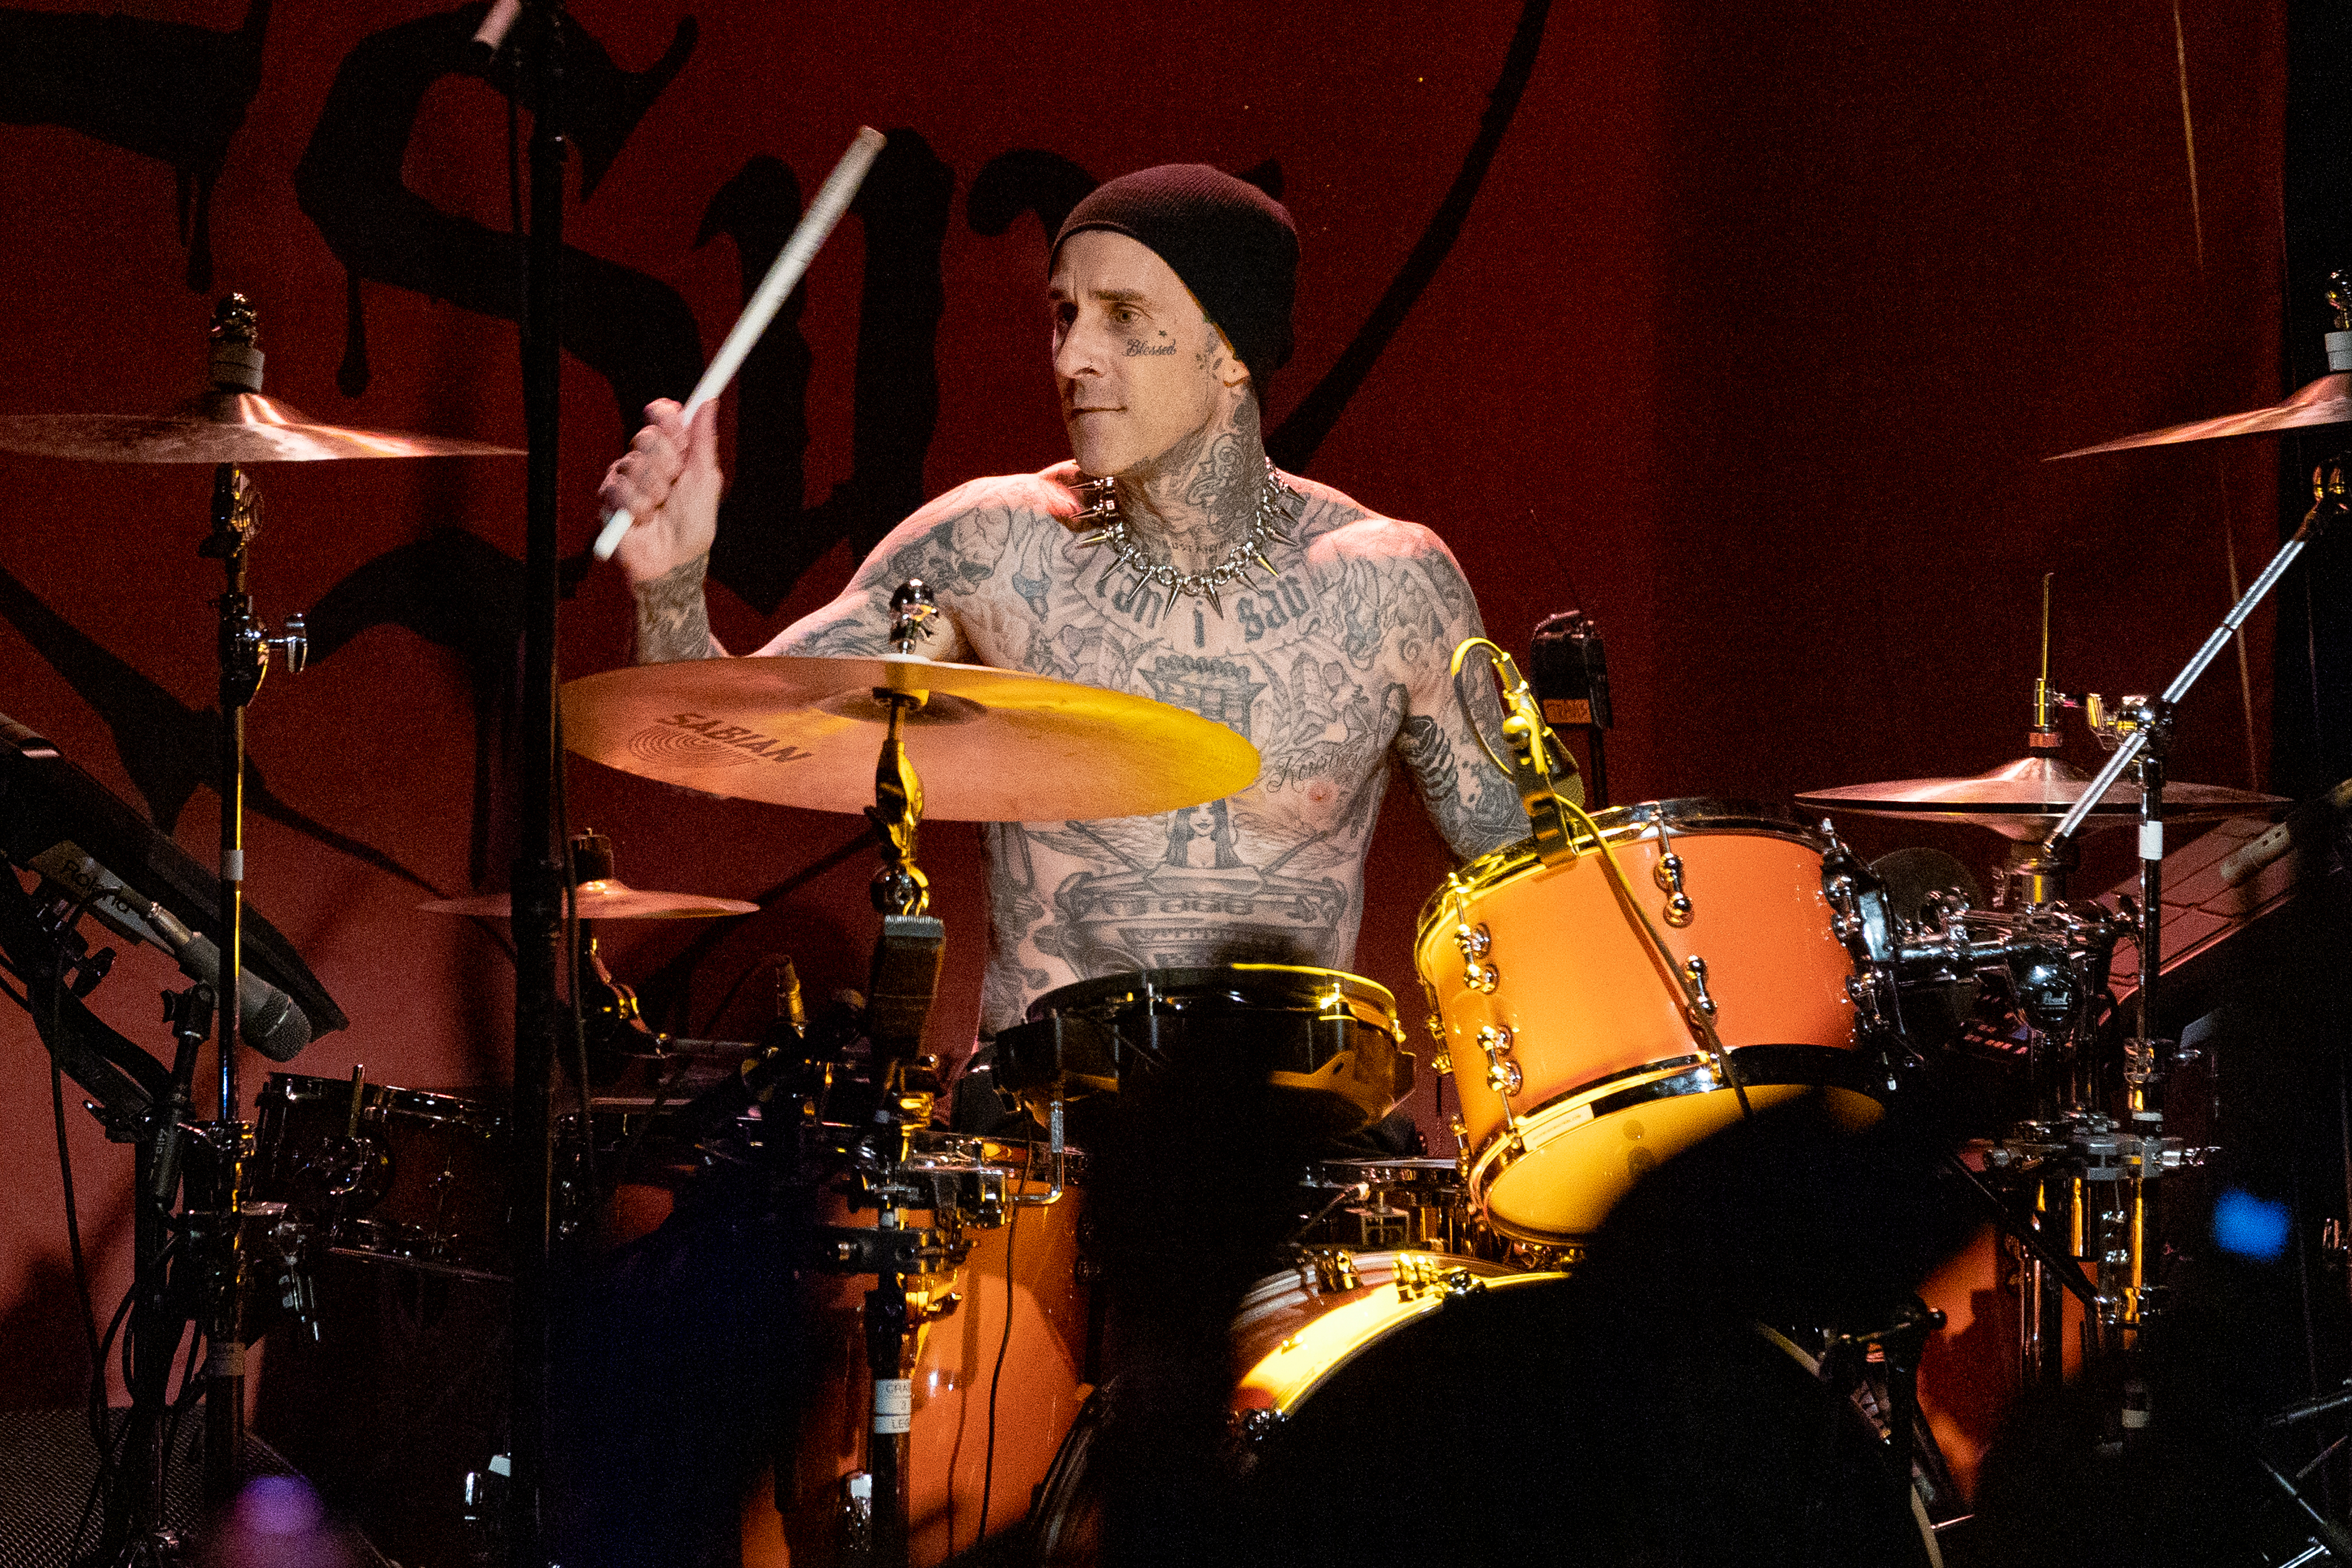 A closeup of Travis Barker playing the drums